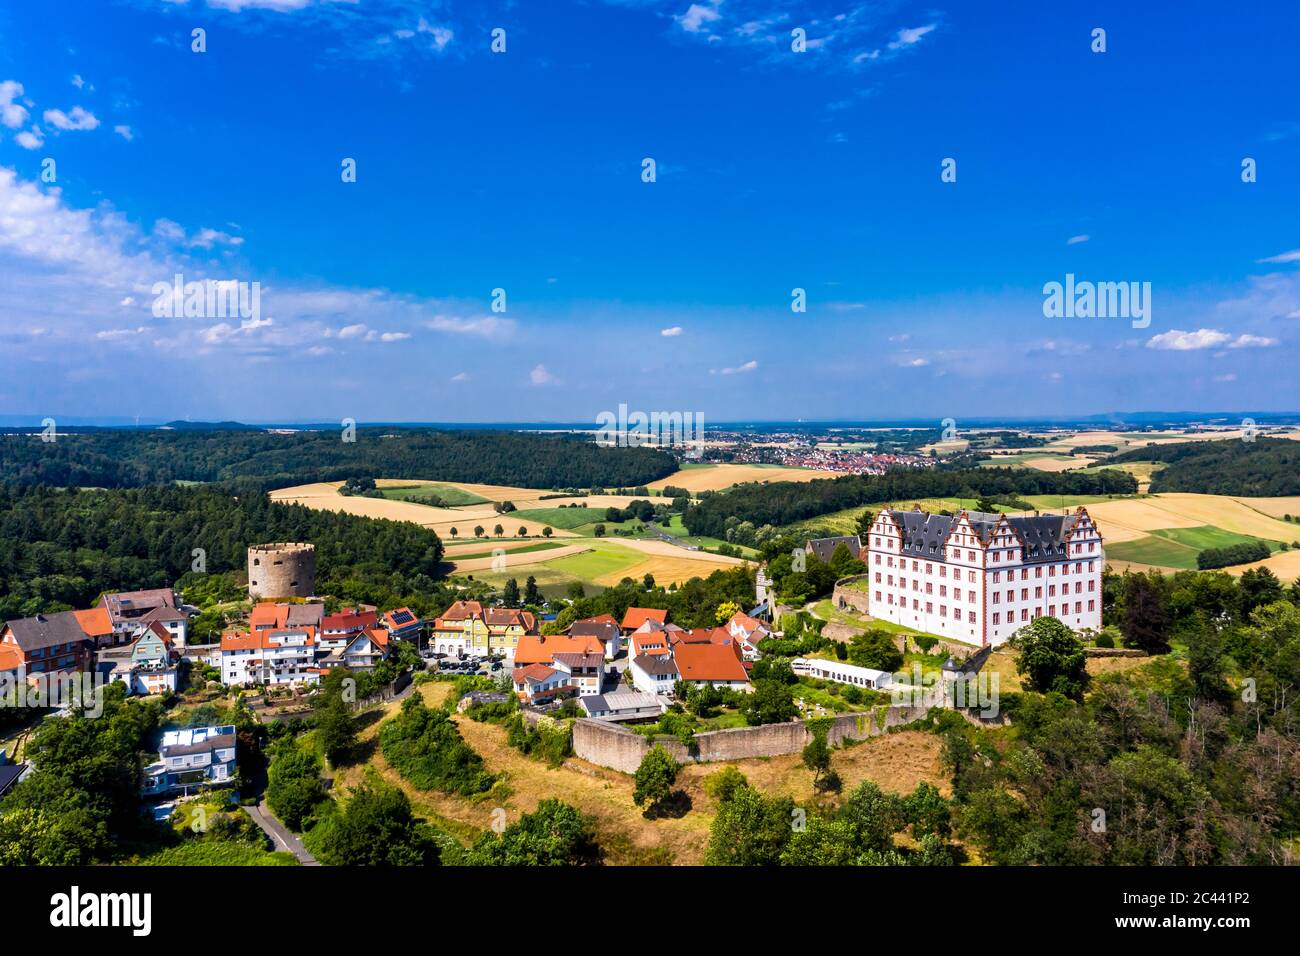 Germany, Hesse, Fischbachtal, Aerial view of Lichtenberg Castle and town Stock Photo